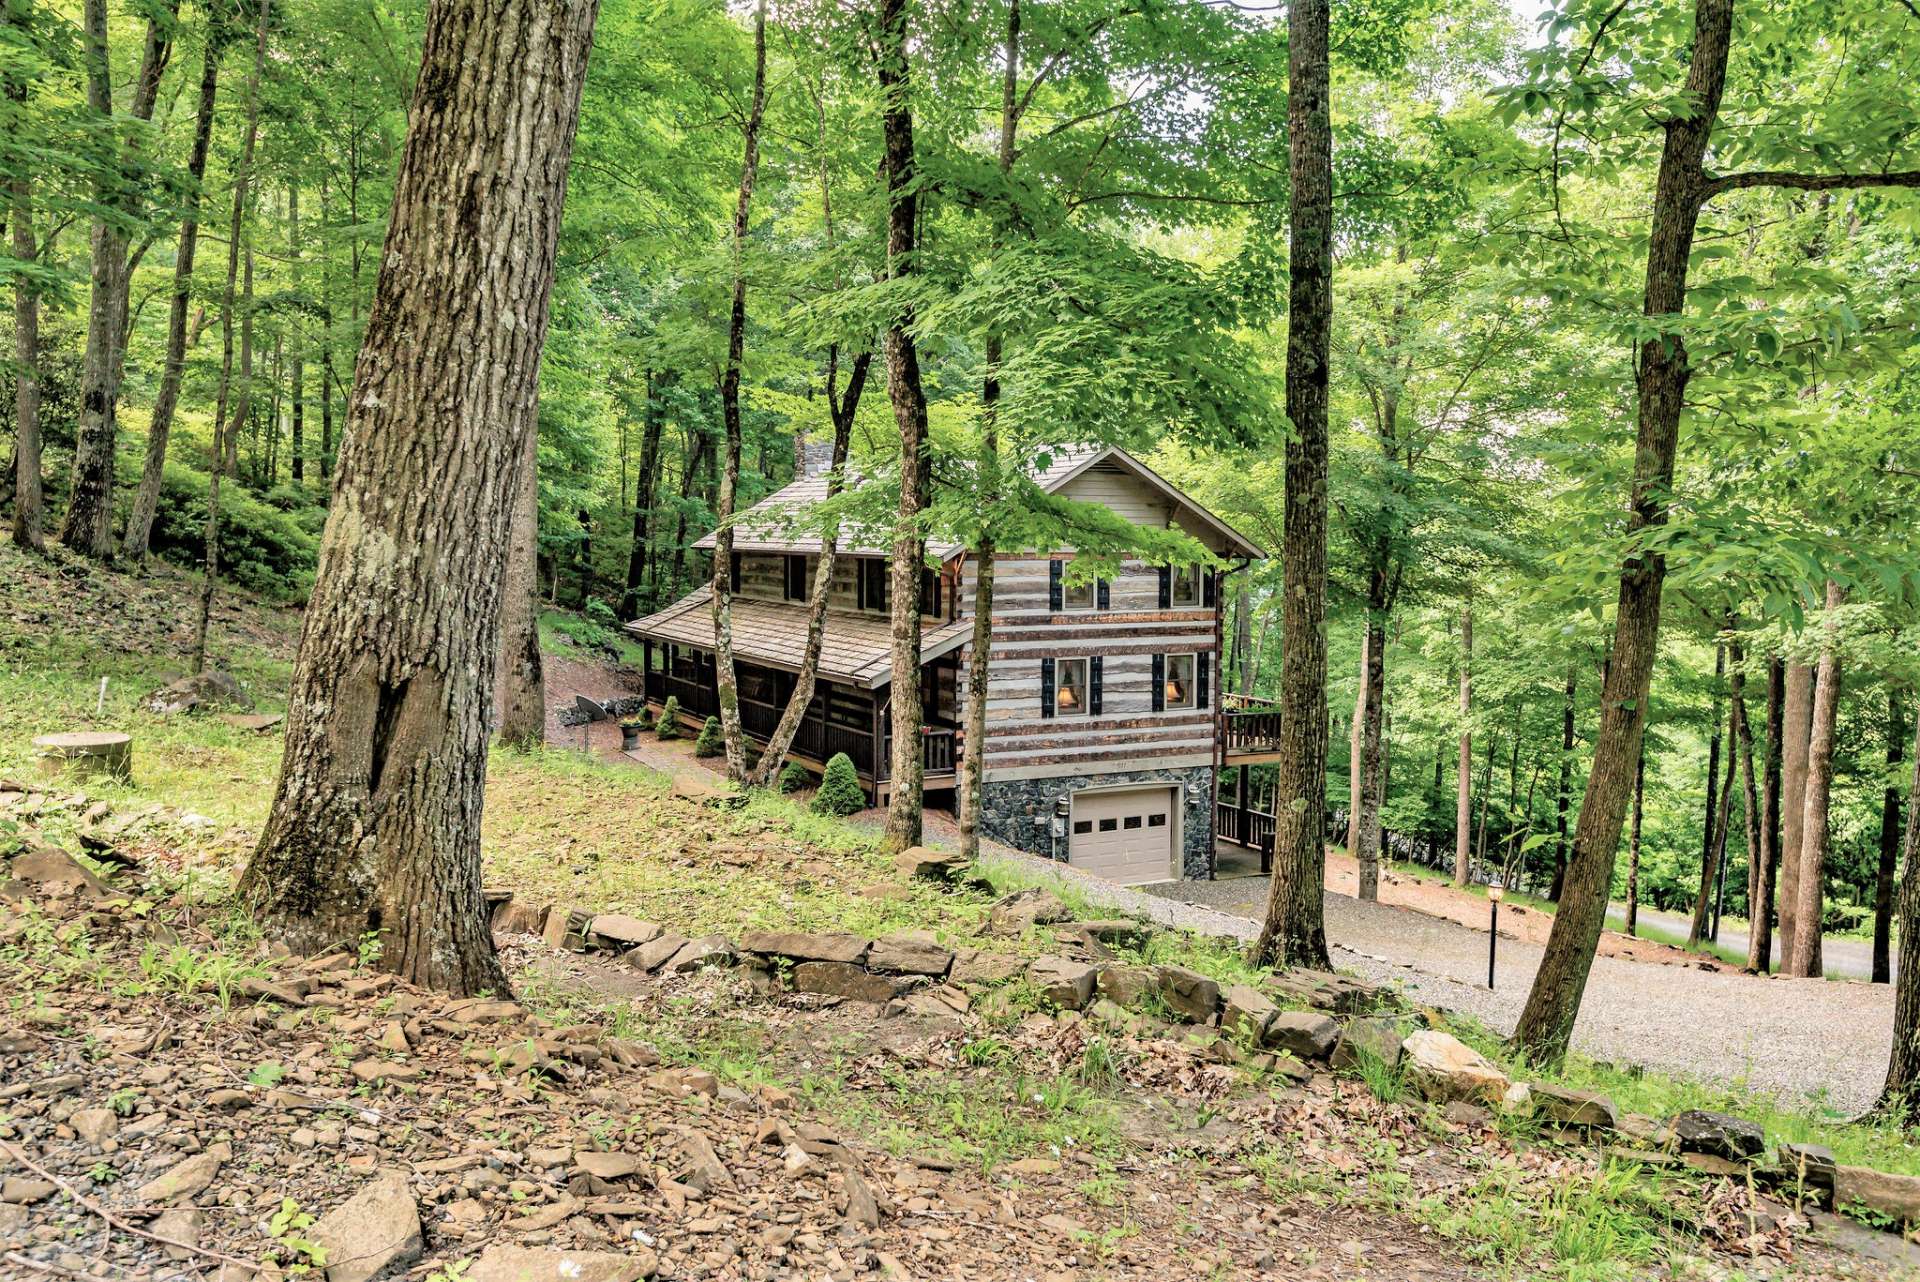 This beautiful cabin sits on a one acre park-like setting in Stonebridge, one of Ashe County's most sought after log home communities.